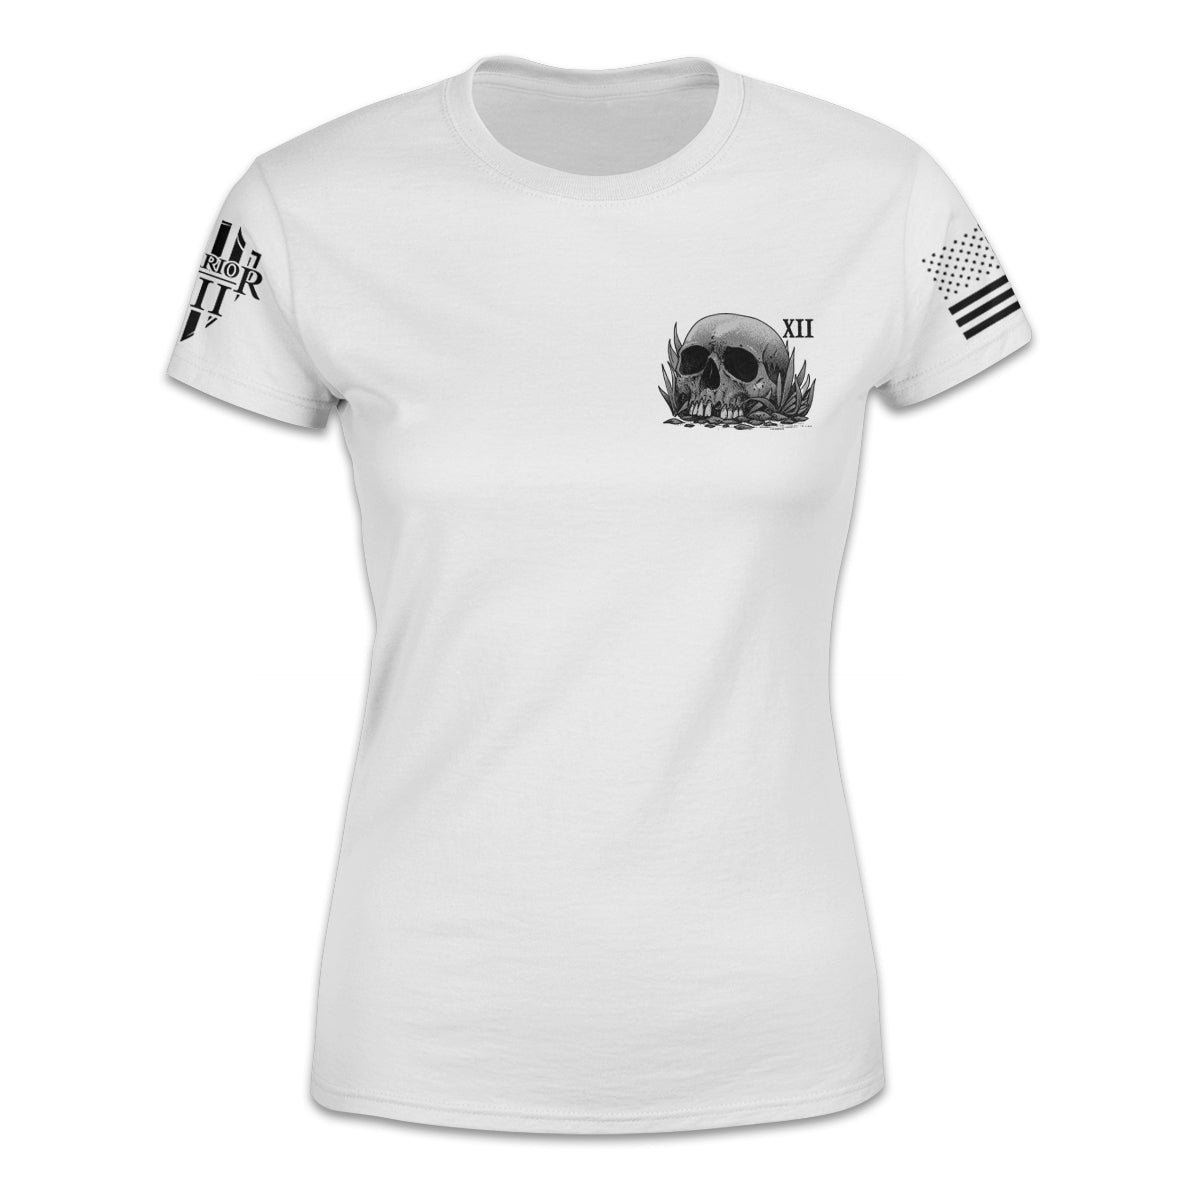 A white women's relaxed t-shirt with a skull printed on the front.